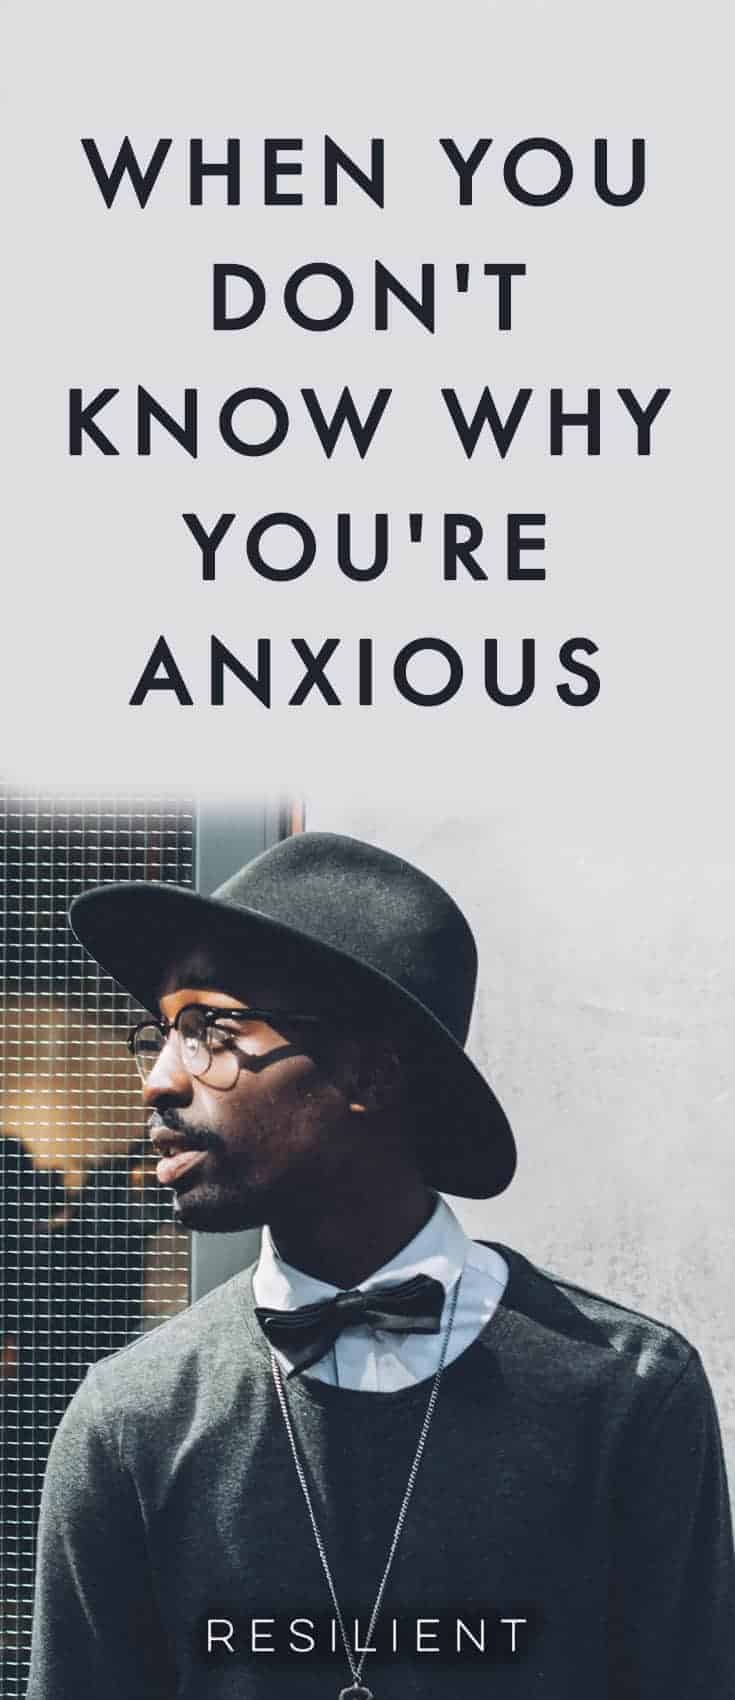 When You Don’t Know Why You’re Anxious